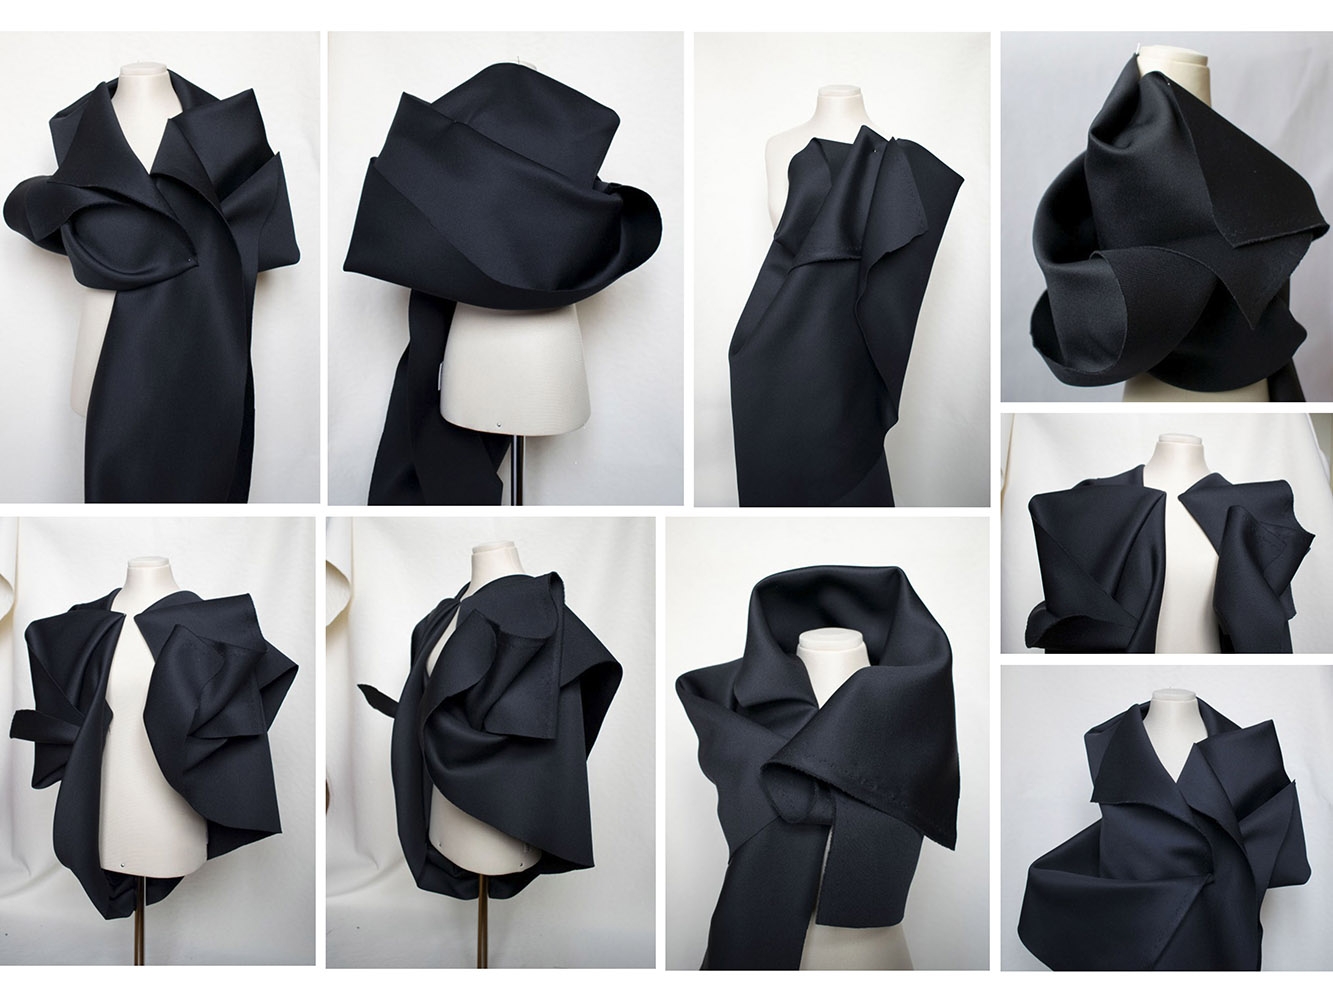 Several images of fabric draped on a mannequin using layering to create shape